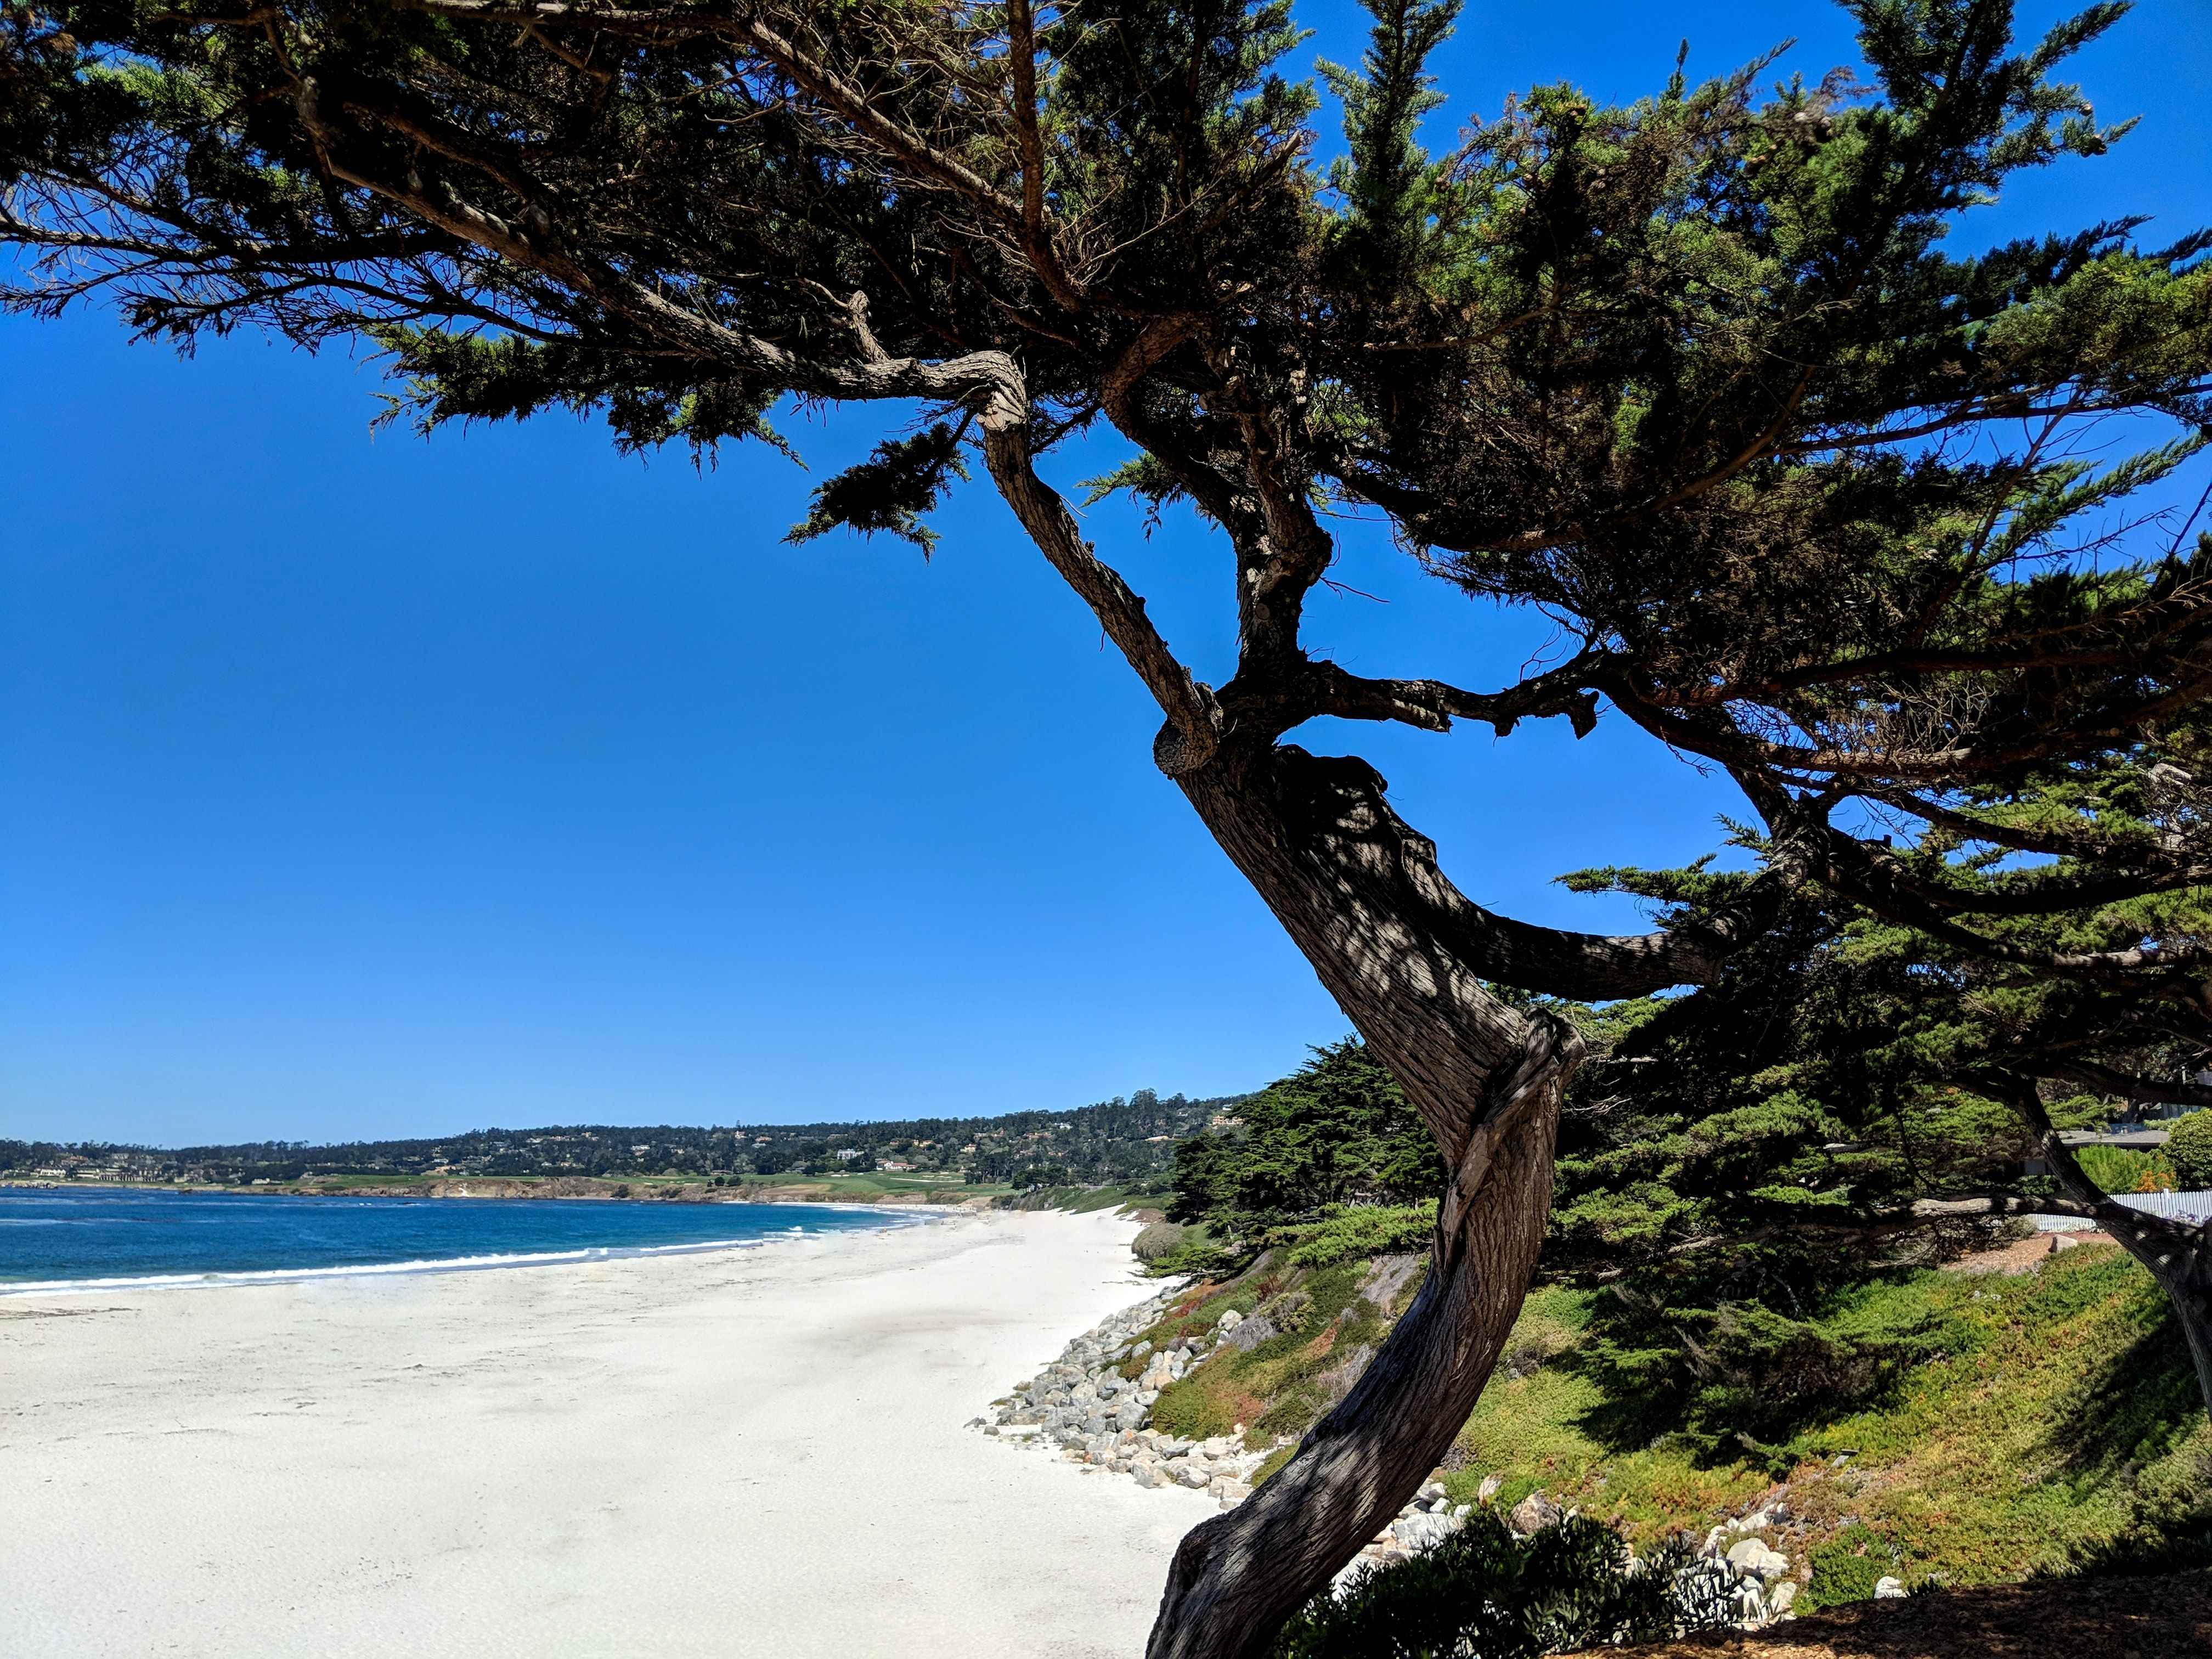 Carmel-by-the-Sea, CA Fishing: Natural Scenery and Artistic History